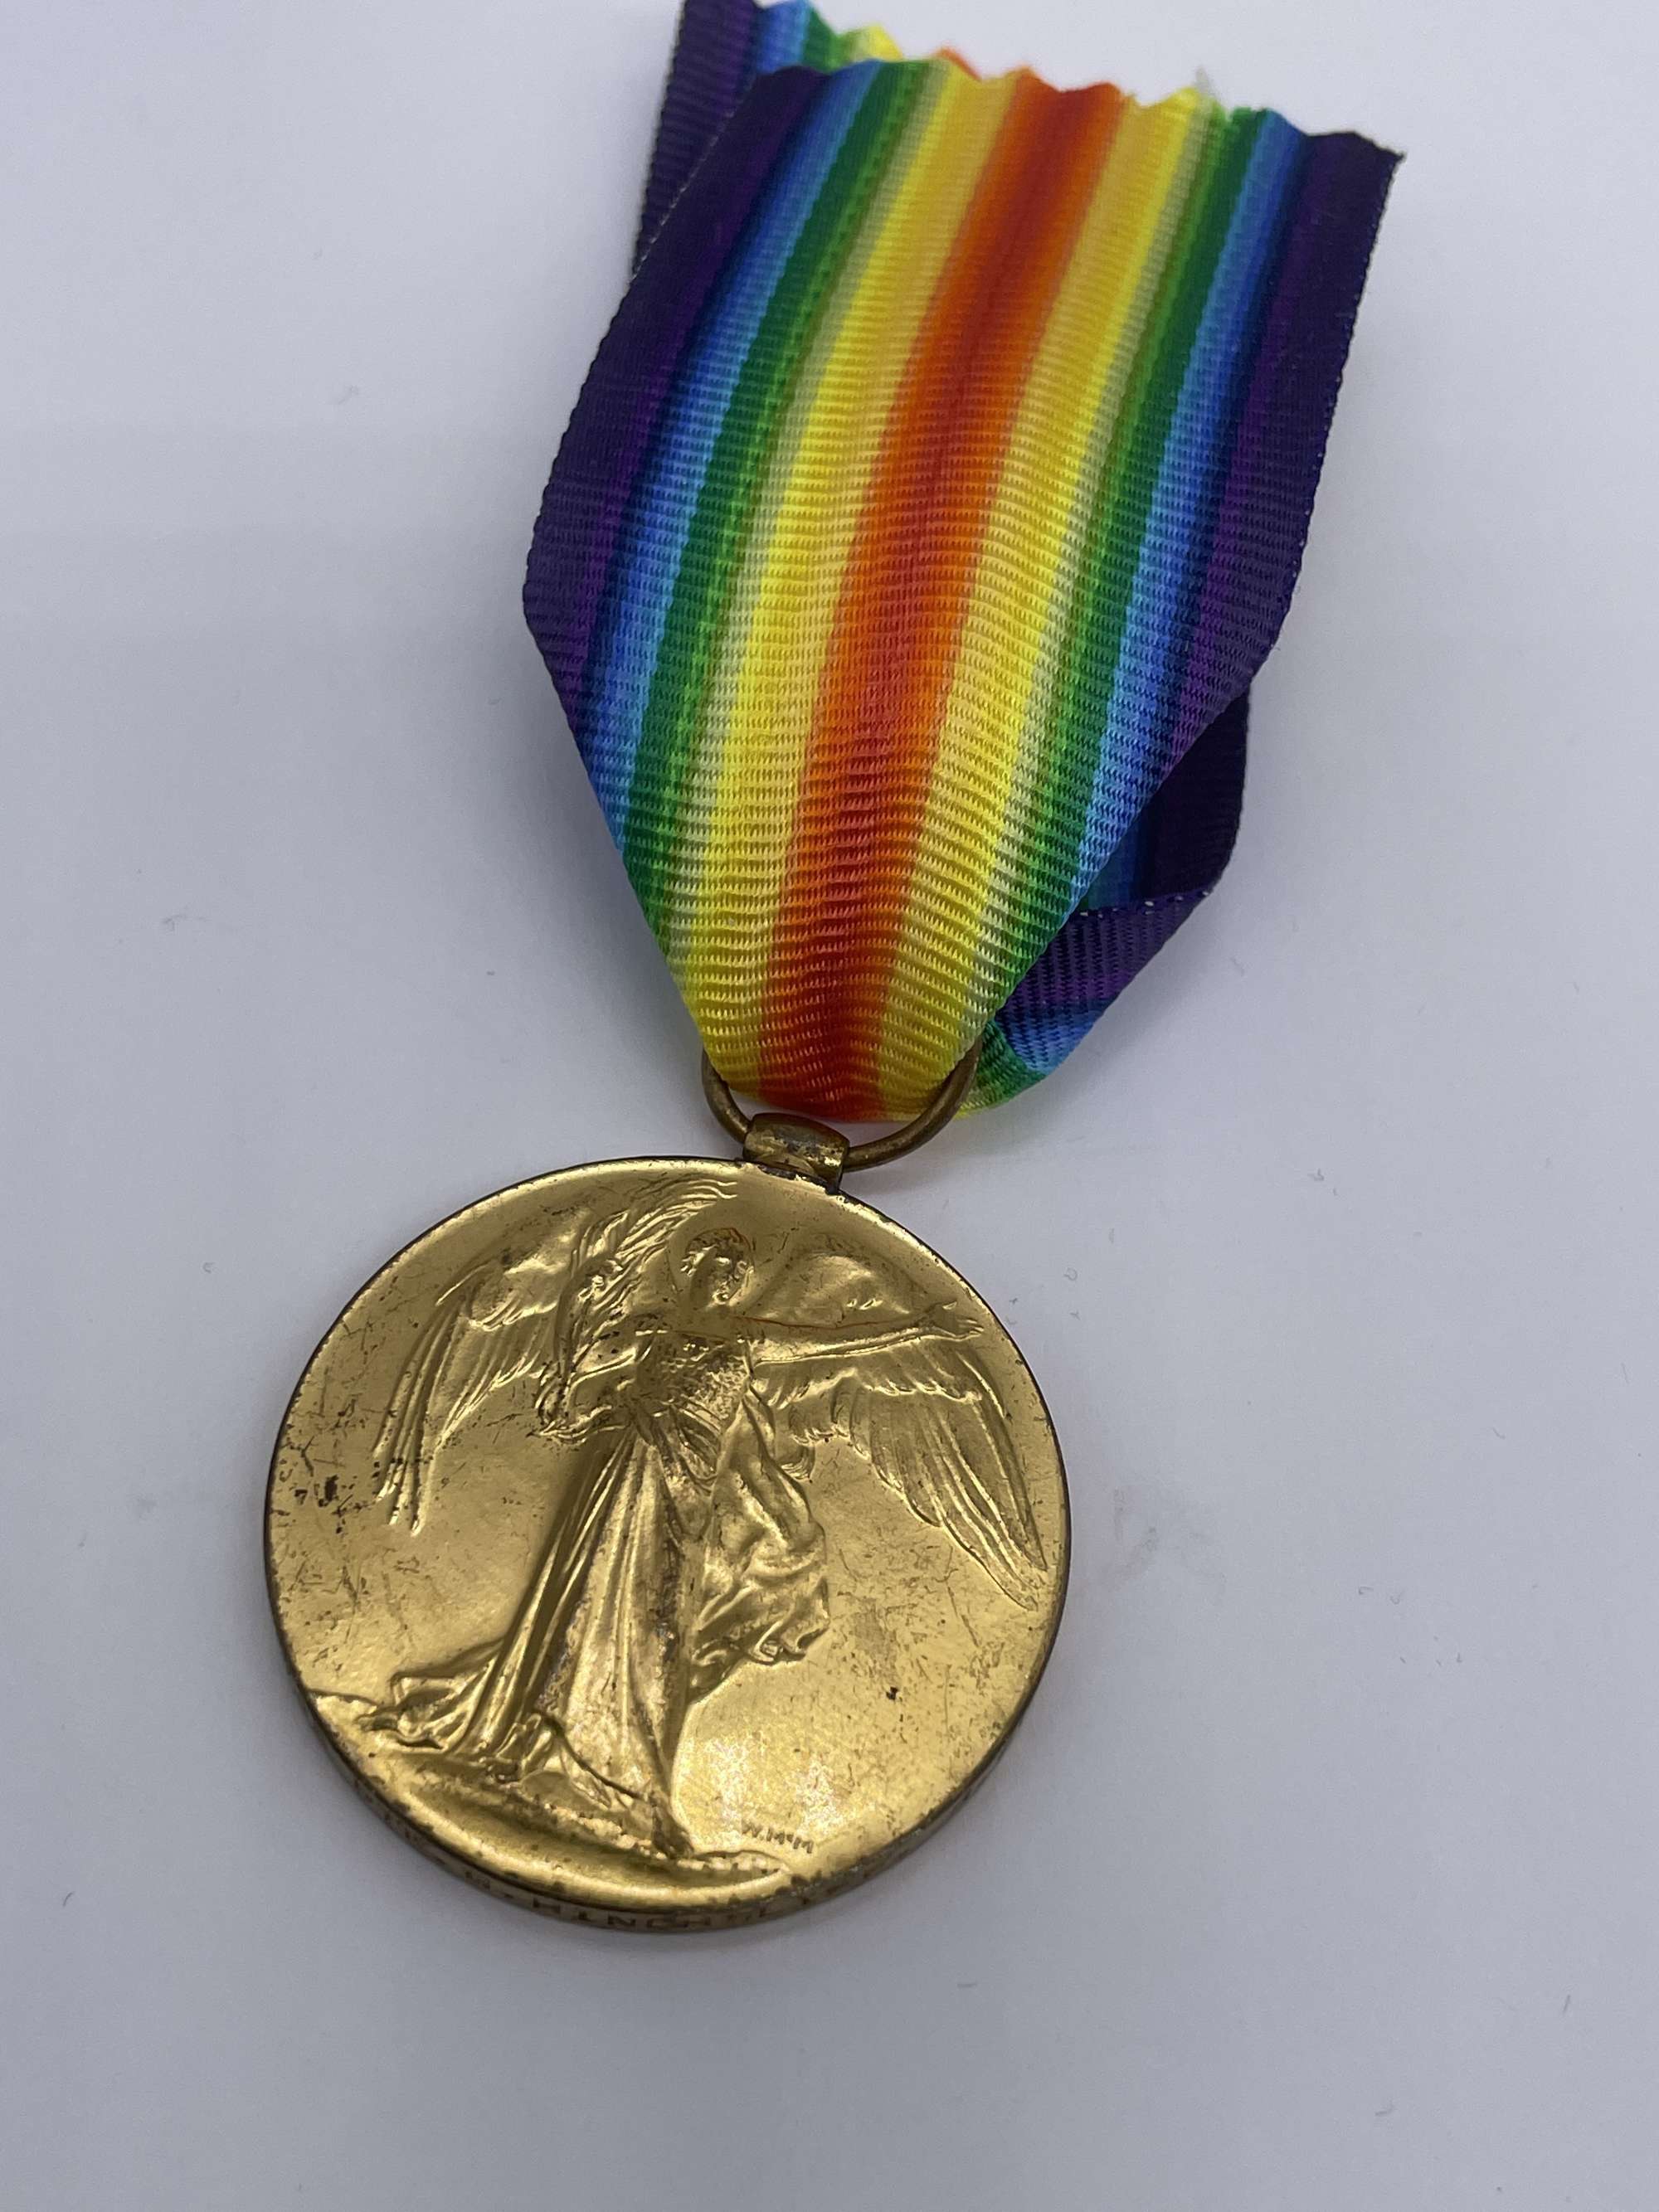 Original World War One Victory Medal, Pte Hinchsliff, 22/Royal Fusiliers, Killed in Action